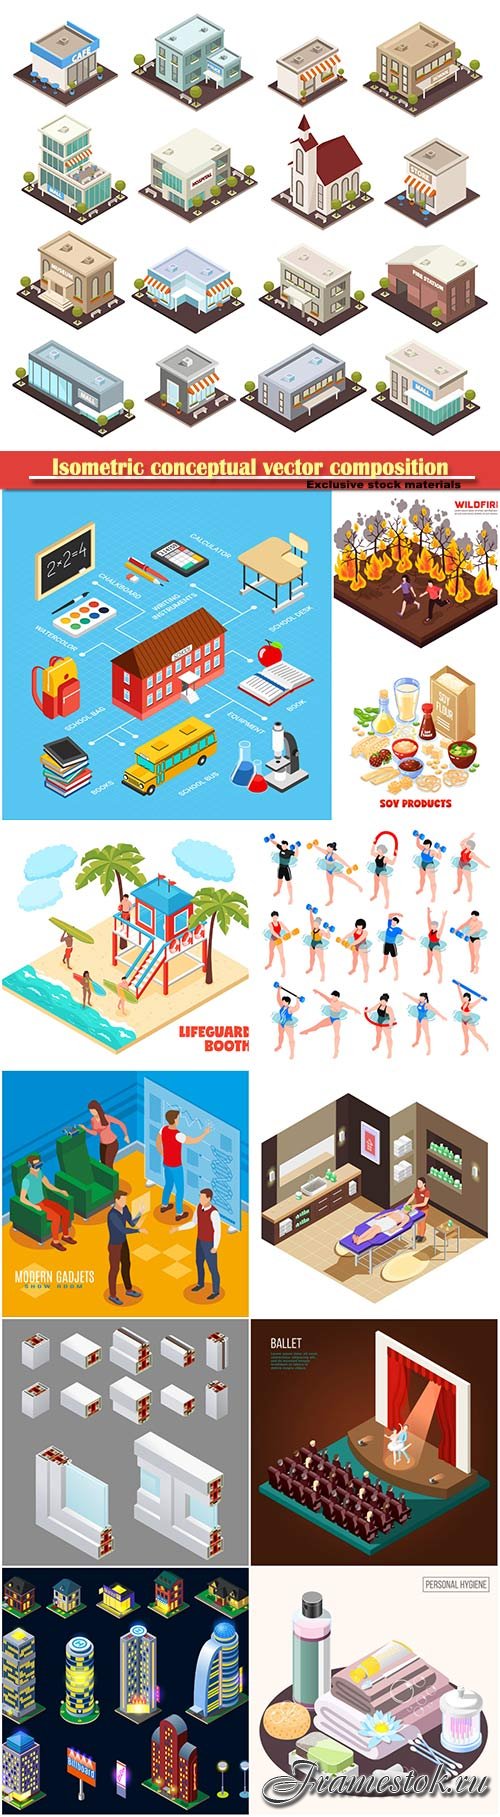 Isometric conceptual vector composition, infographics template # 22